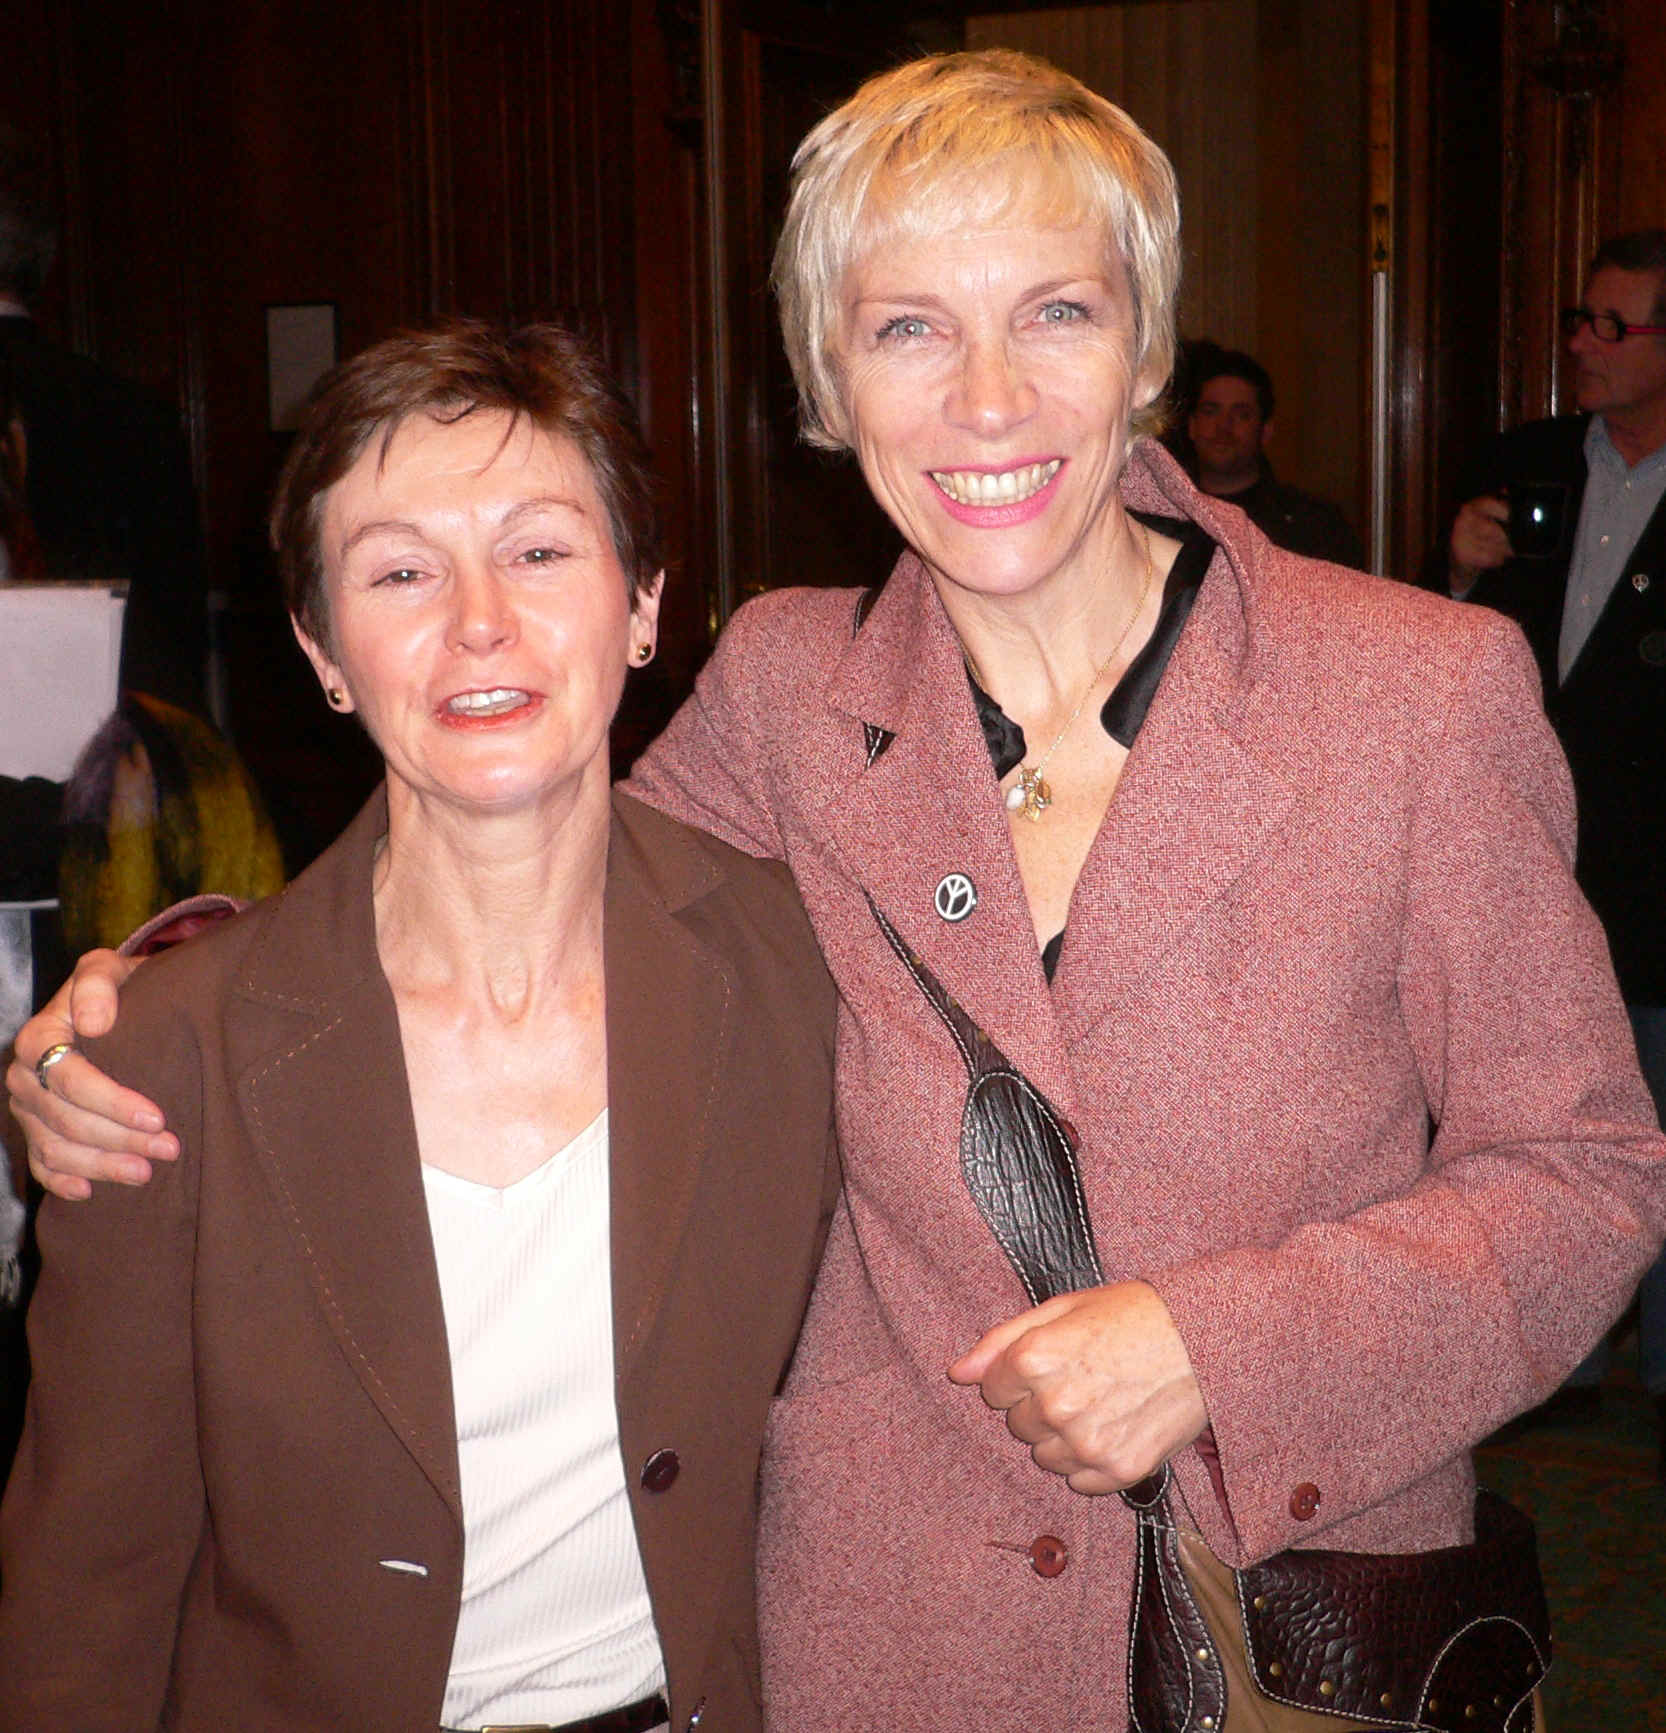 C0729T.LJ with Annie Lennox 14.03.07 CROPPED and COMPRESSED.JPG (1263760 bytes)